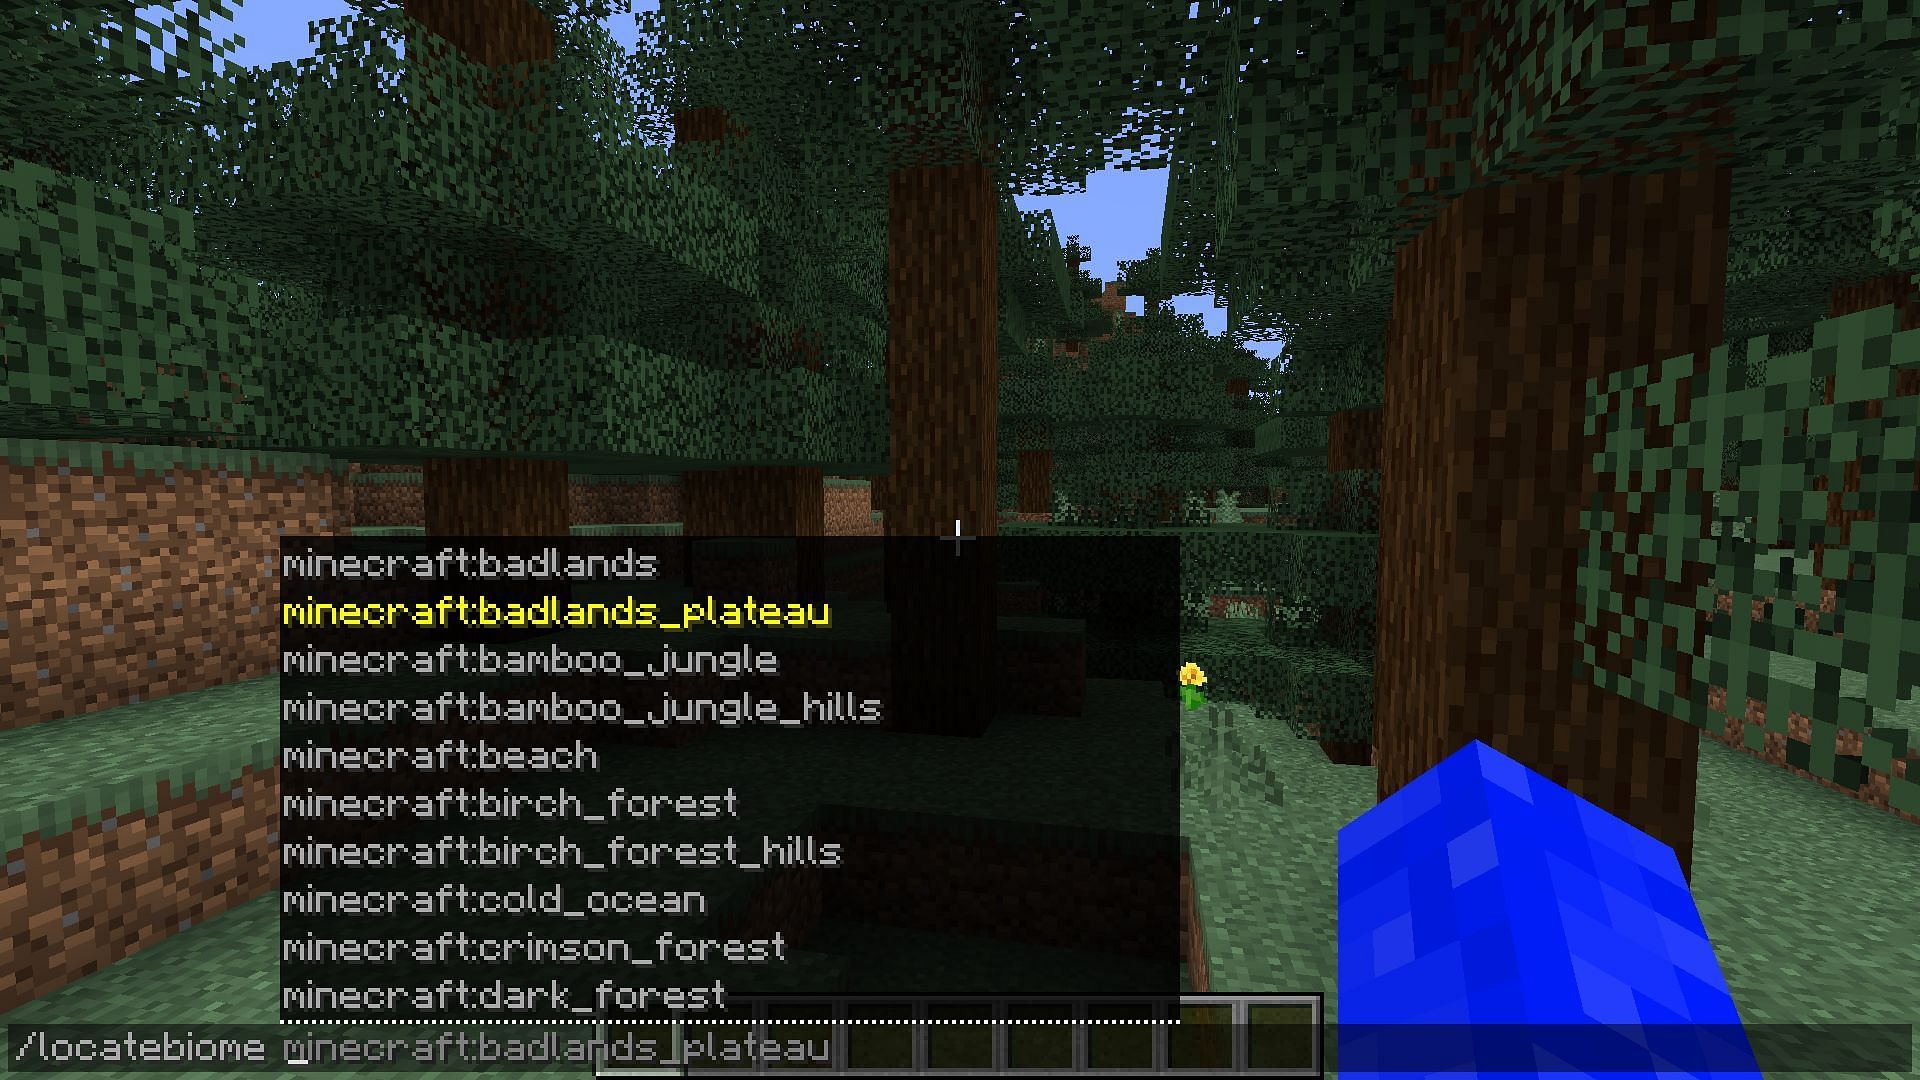 /locate has become one of the most useful commands for explorers in Minecraft (Image via /u MerryHeckmas on Reddit)